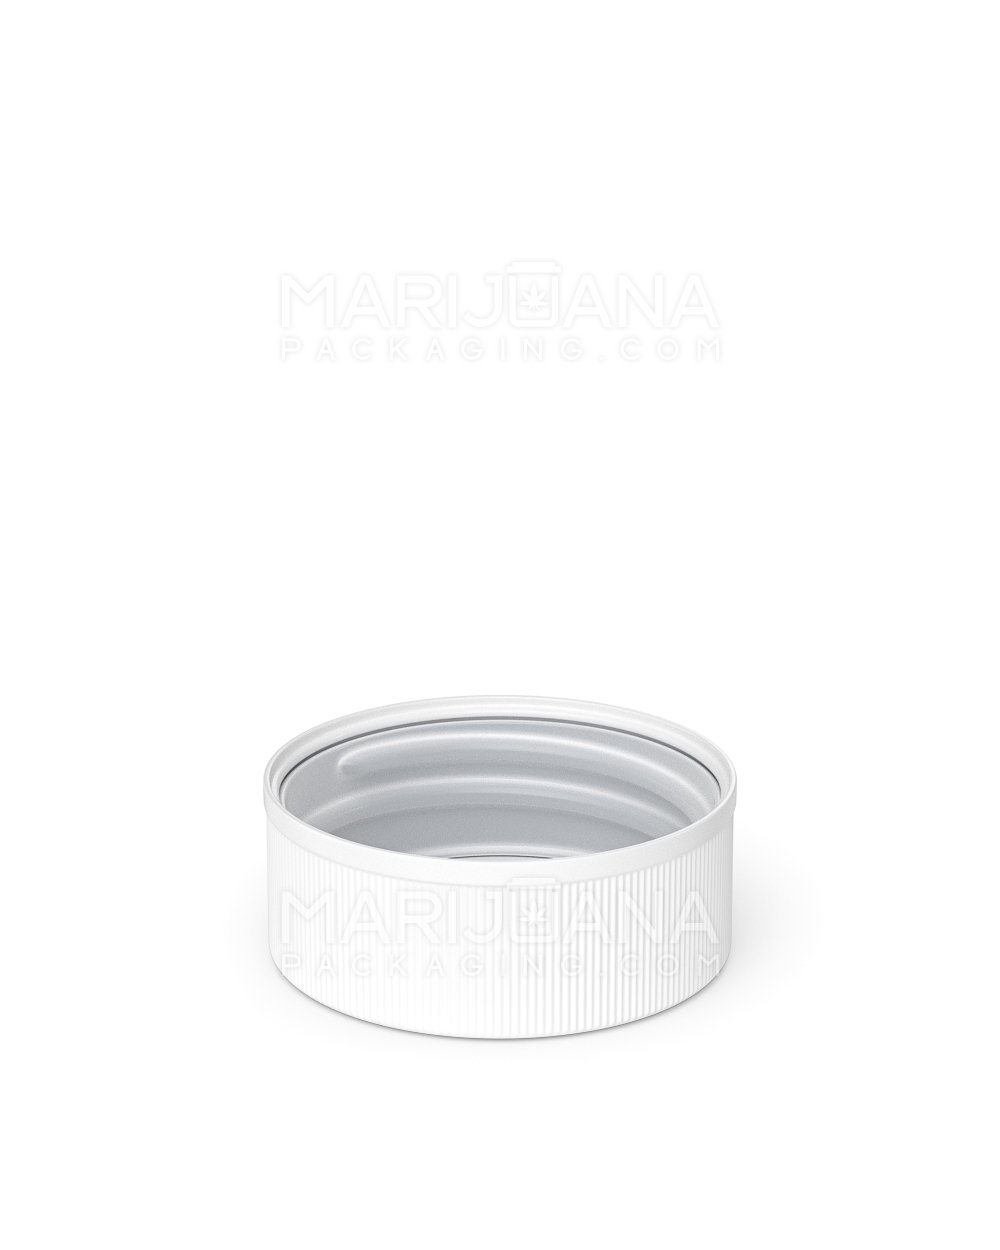 Child Resistant | Ribbed Push Down & Turn Plastic Caps w/ Text & Foam Liner | 38mm - Semi Gloss White - 320 Count - 4